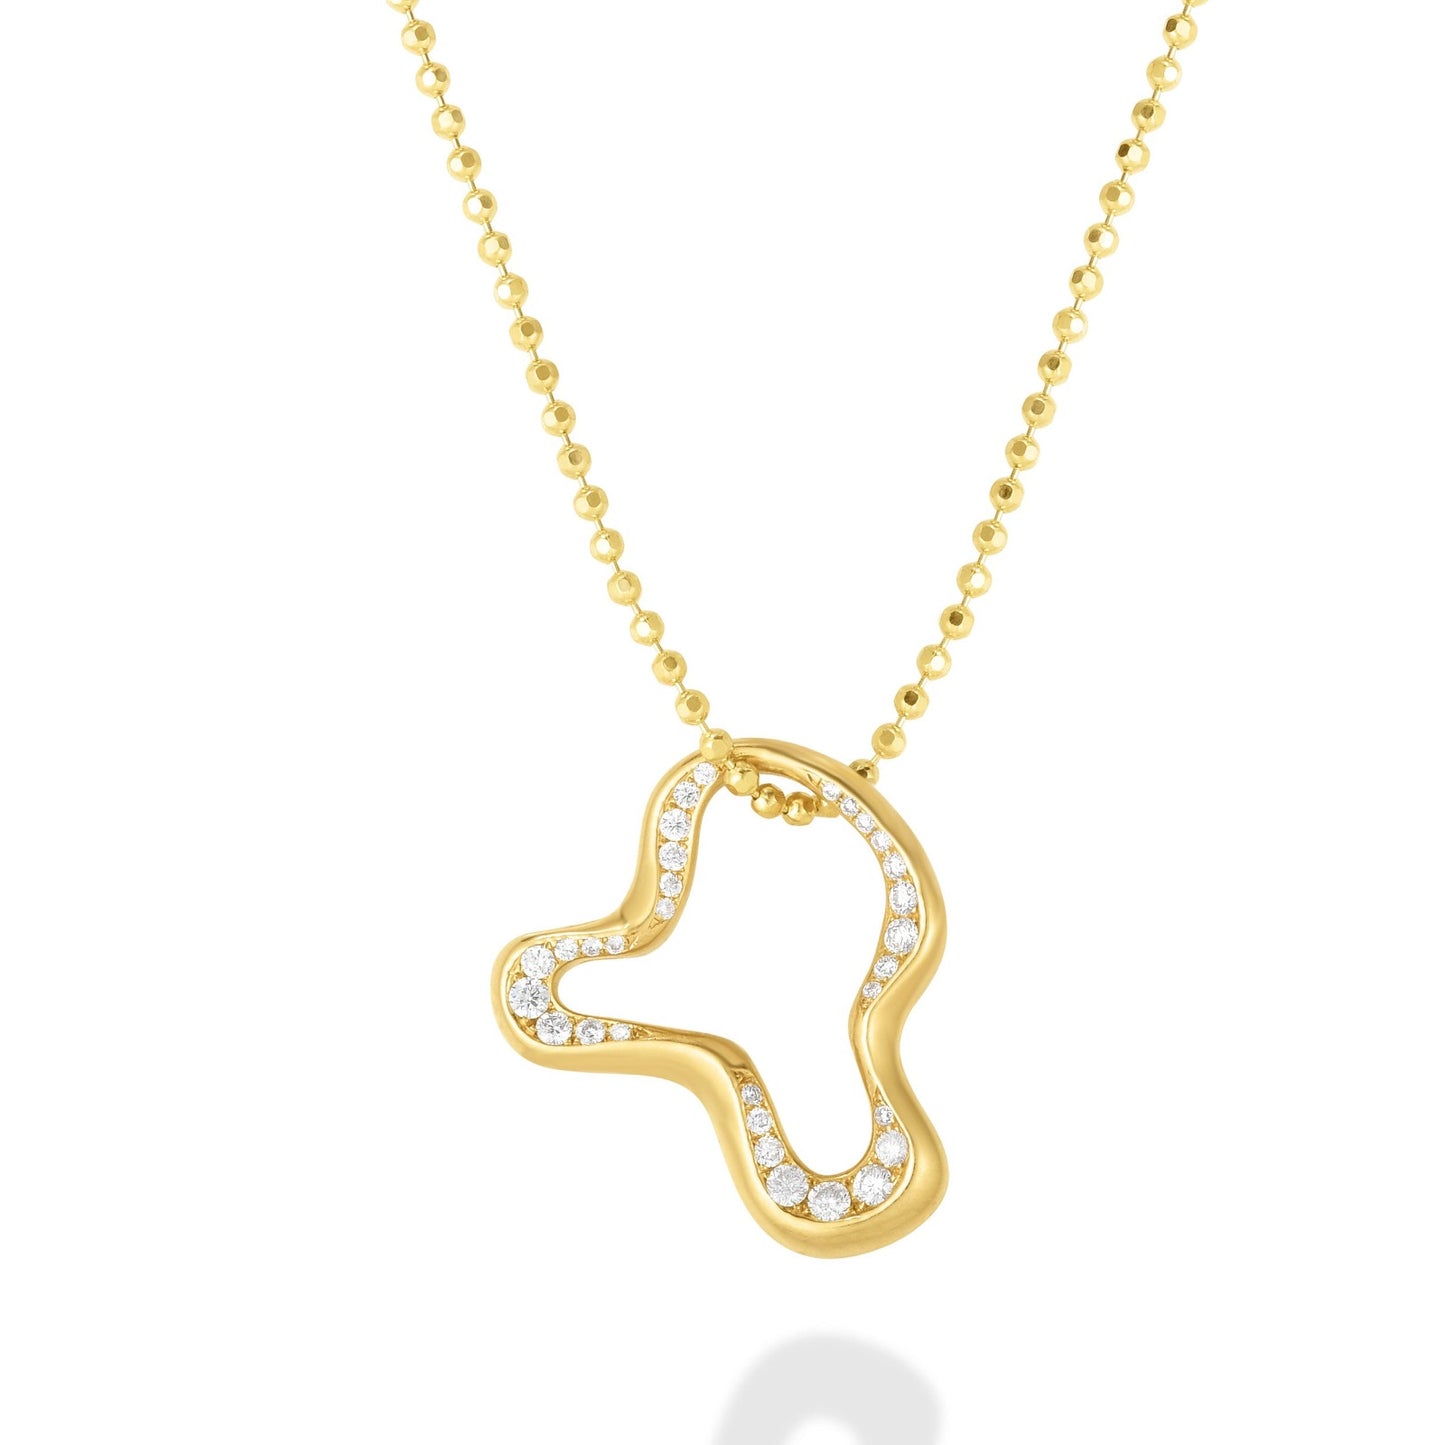 14k gold Demi Pavé Ripple Charm. Hanging from a diamond cut bead necklace.